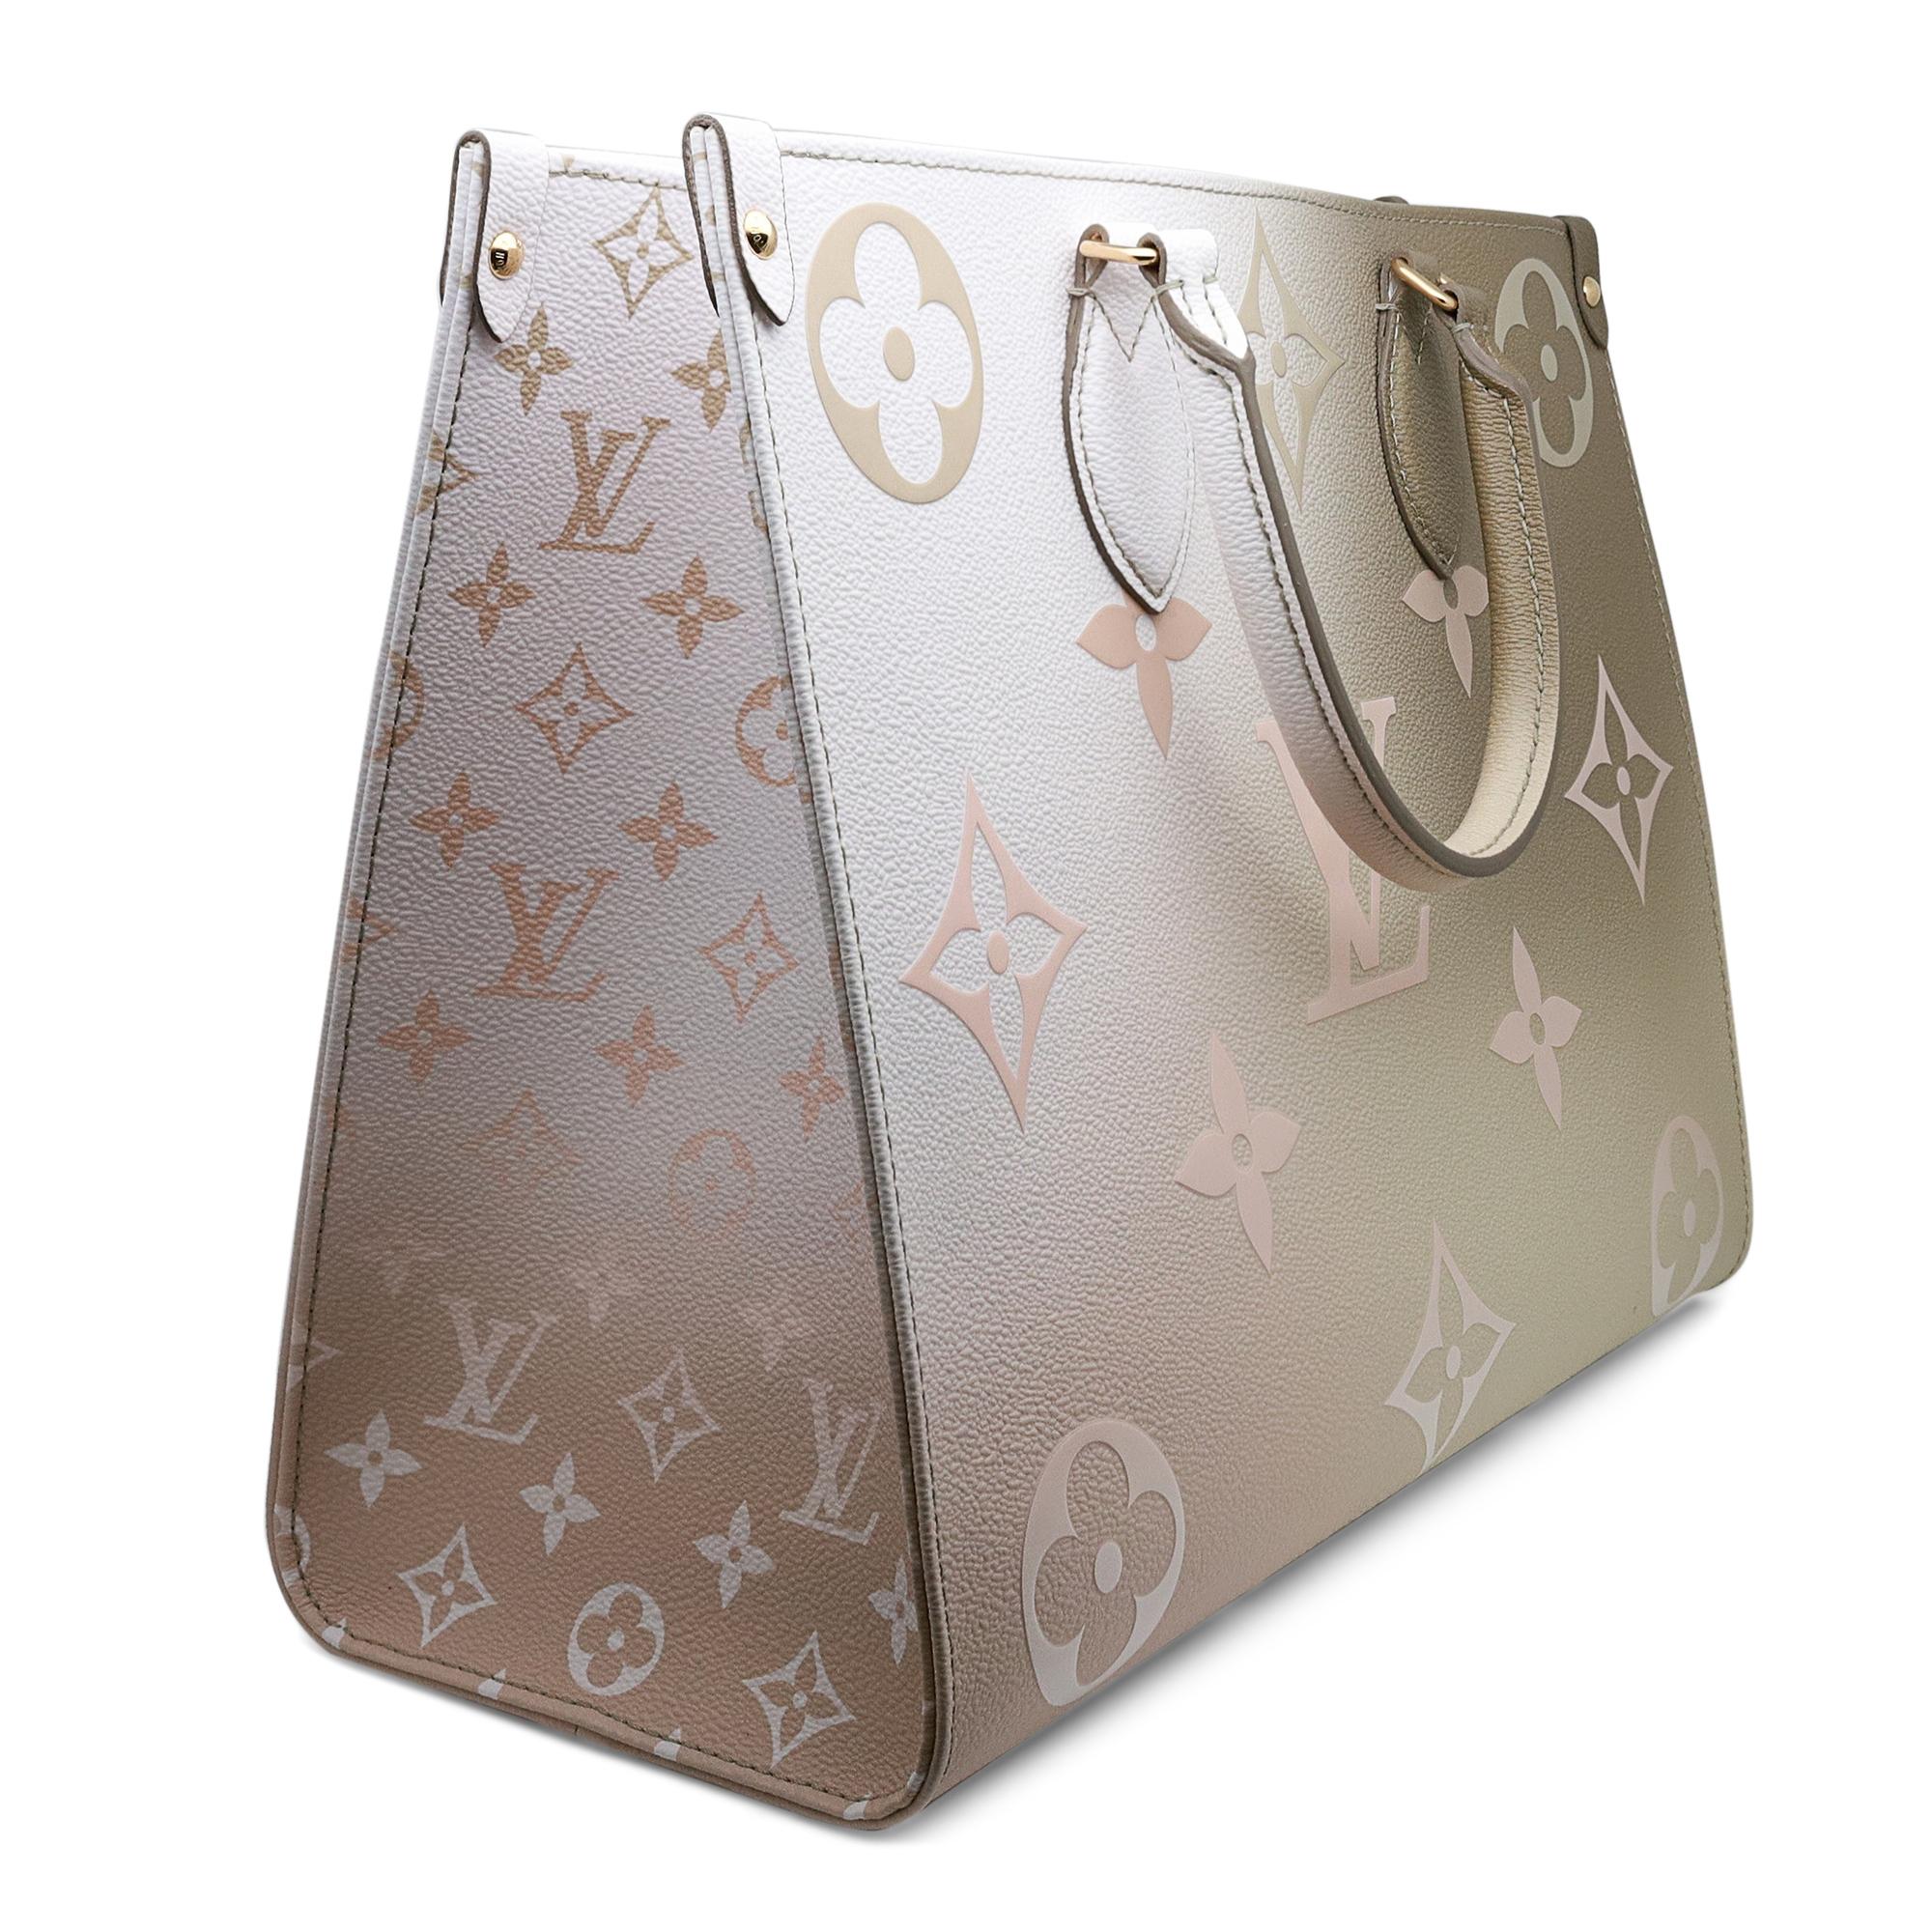 Louis Vuitton Onthego MM Sunset Kaki Leather Handbag. Featuring monogram canvas printed leather with a color gradation inspired by the sky at sunset. A roomy, well-organized carryall for office or off-duty pursuits. the bag is fitted with both top